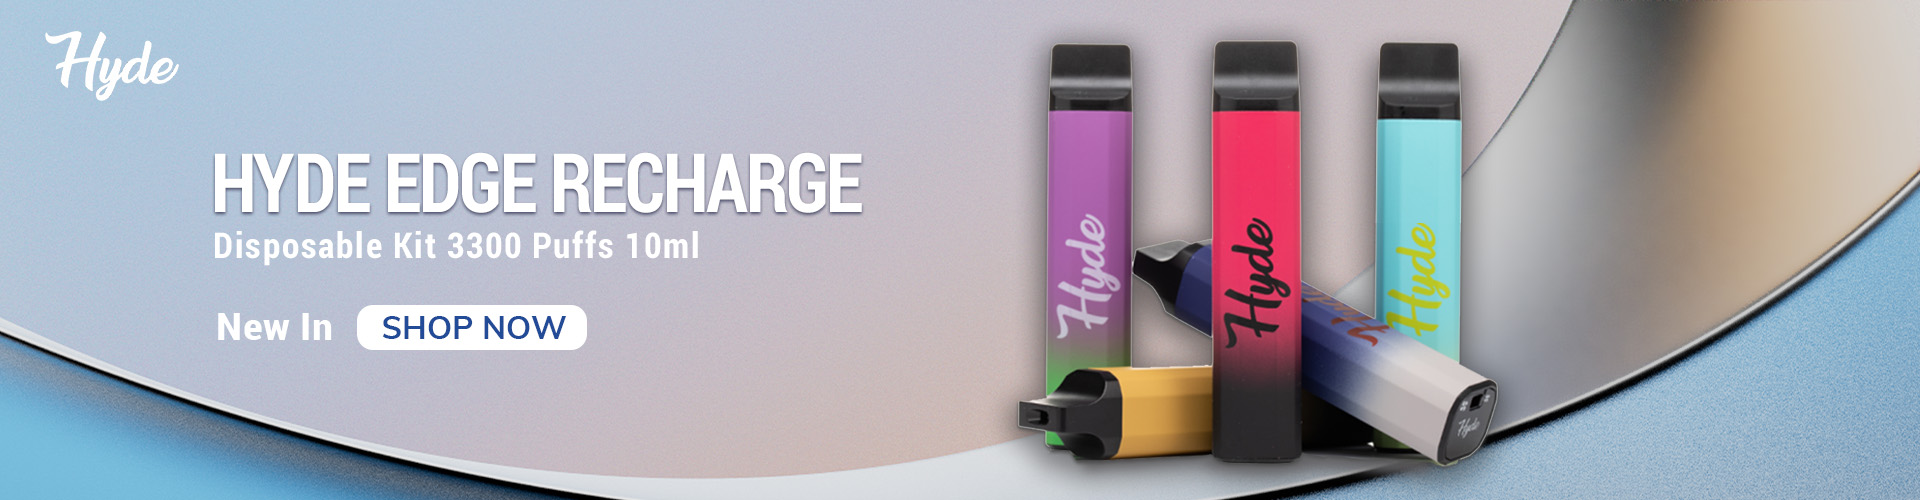 Hyde Edge Recharge 3300 Puffs Disposable Kit 10ml